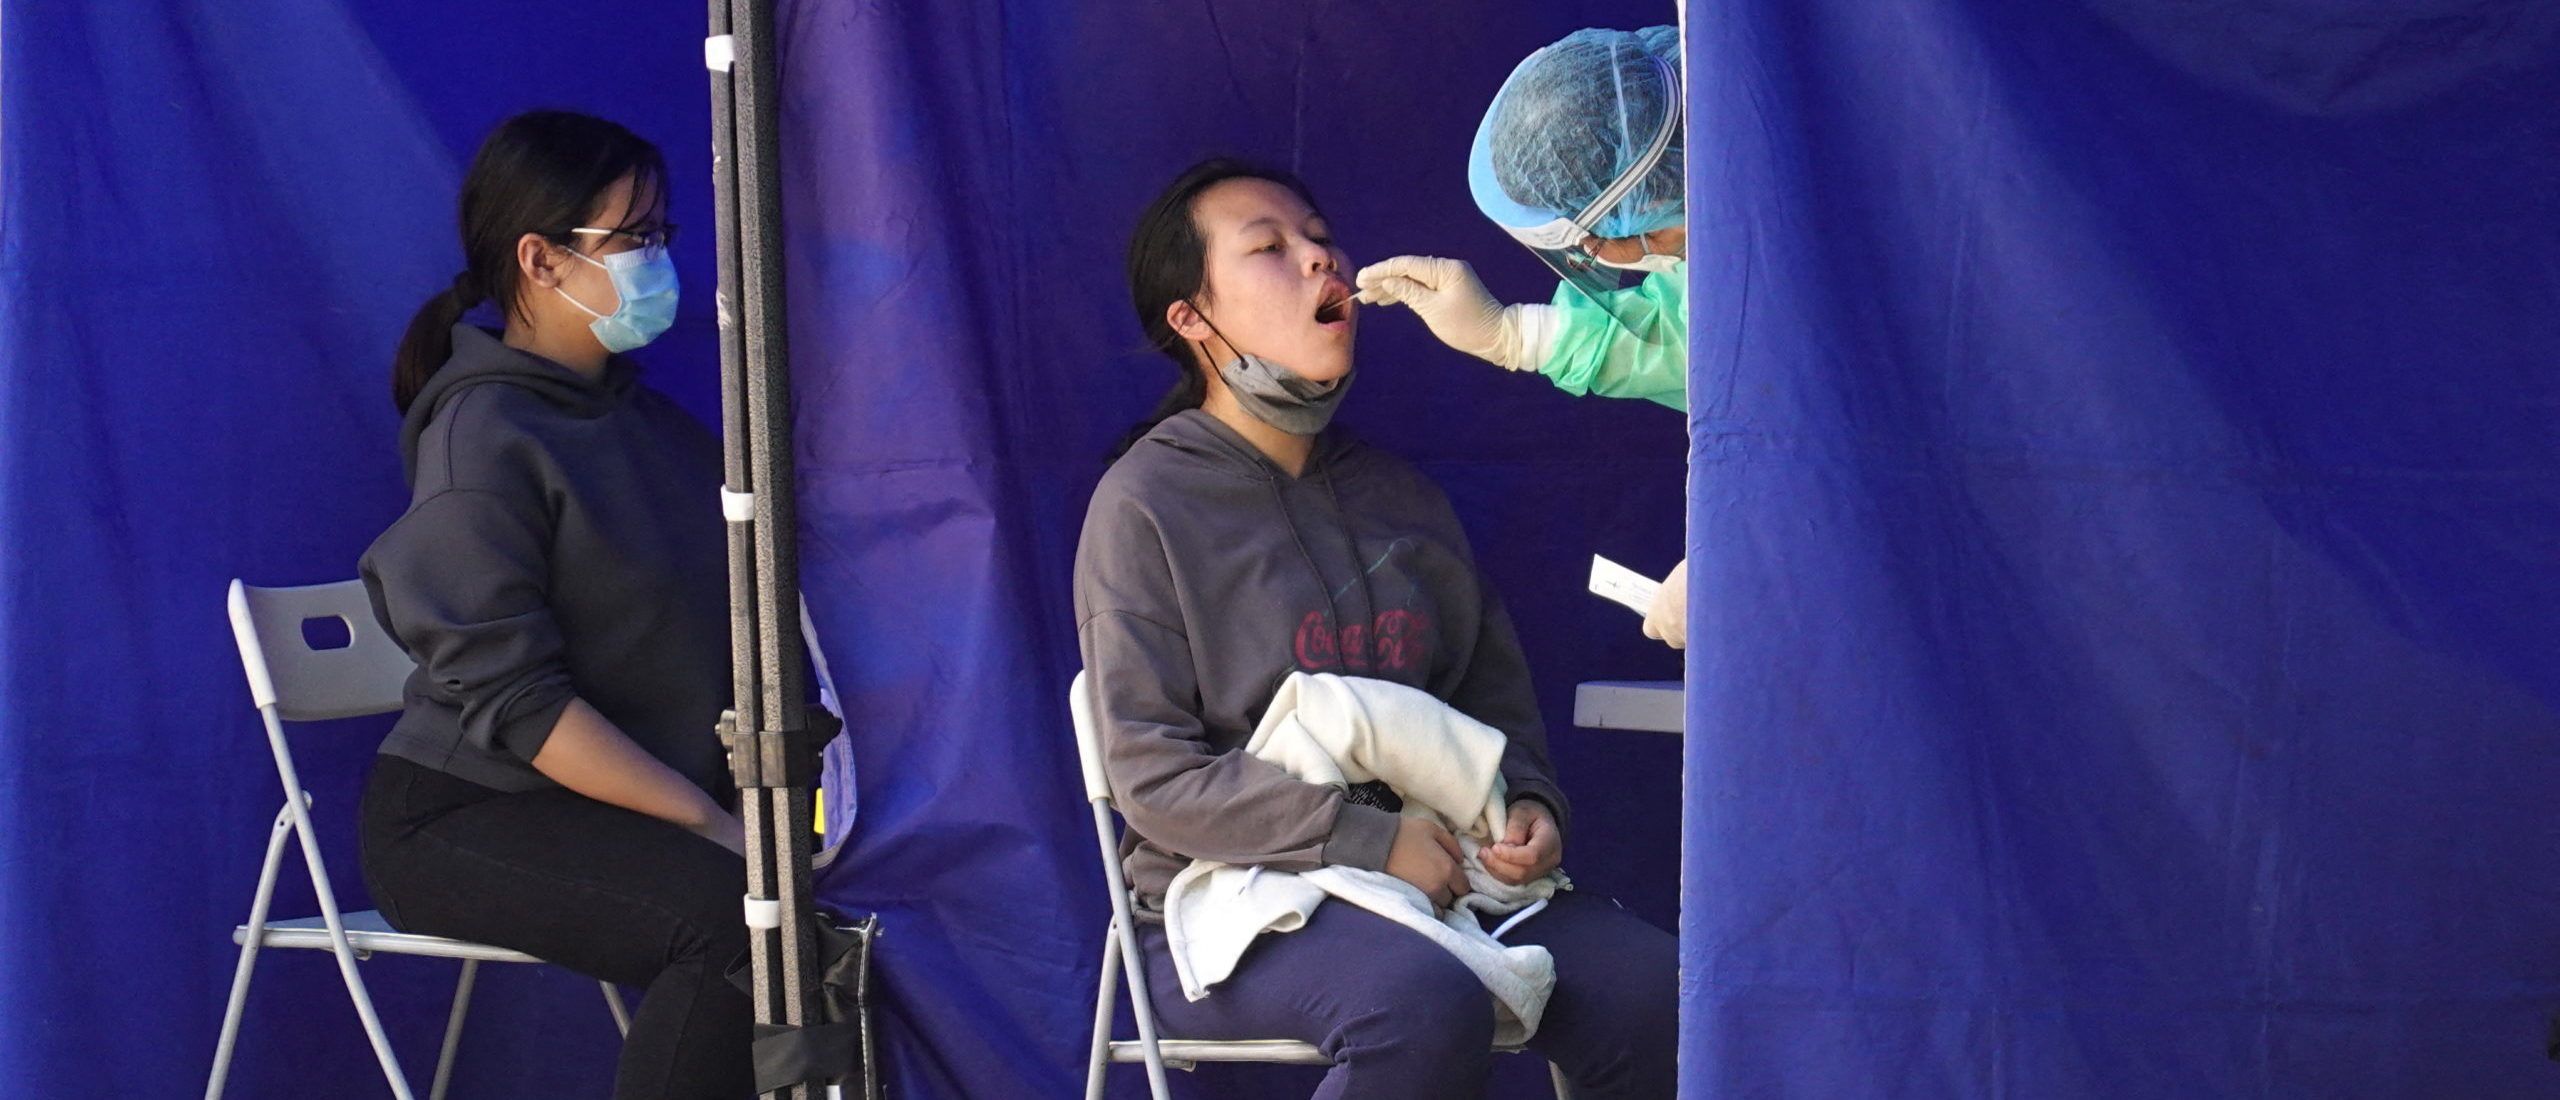 A medical worker takes a swab sample from a person at a makeshift testing site for the coronavirus disease (COVID-19) following the outbreak, in Hong Kong. (REUTERS/Joyce Zhou)